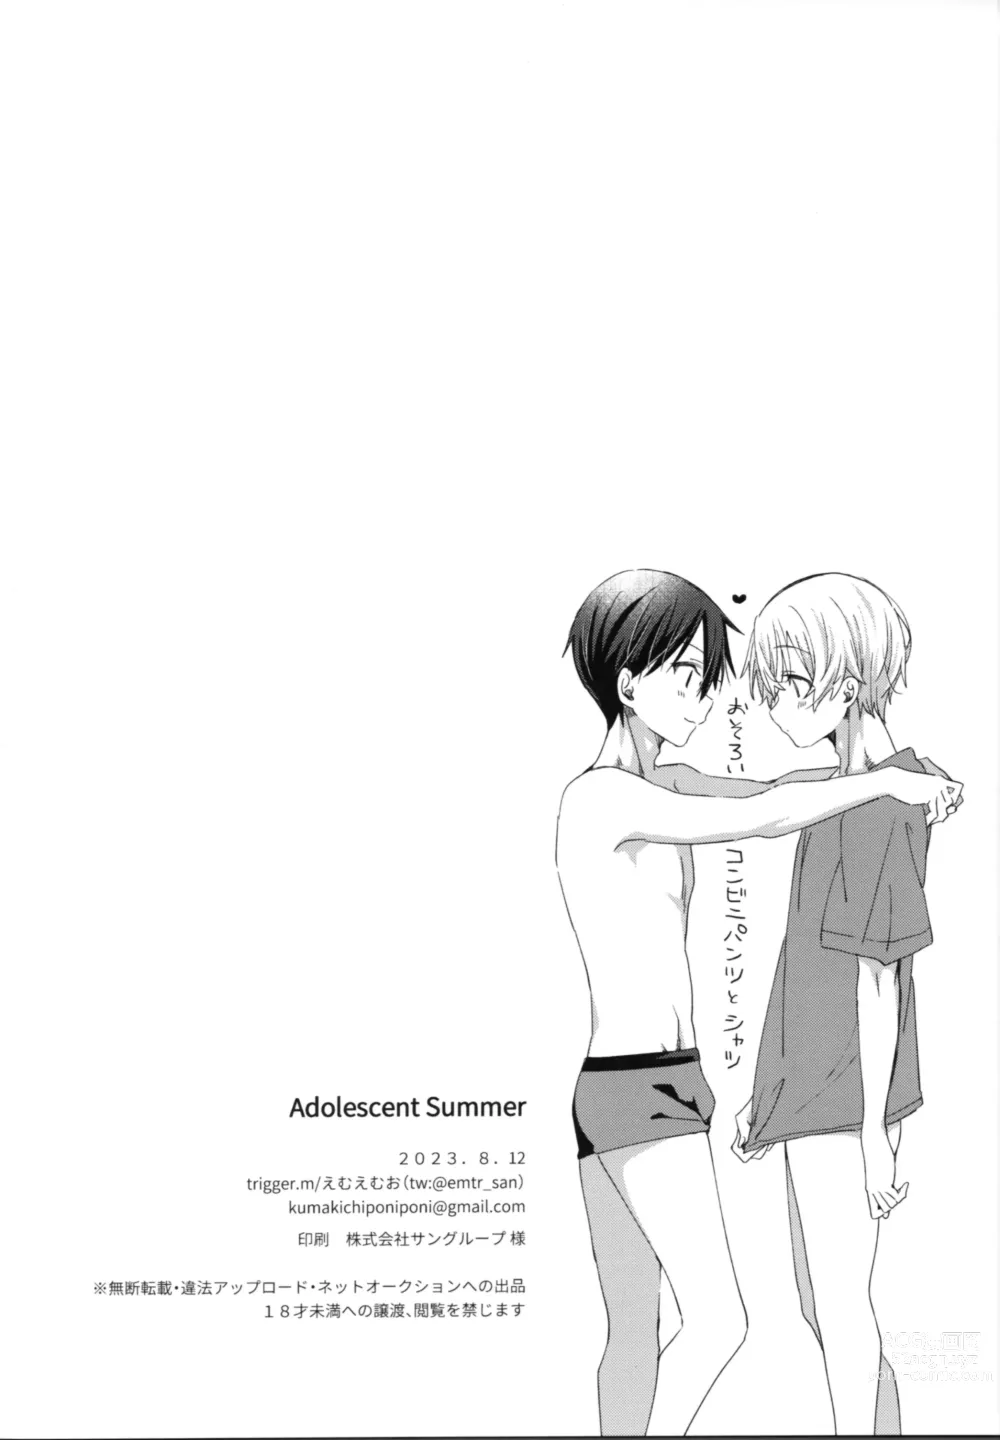 Page 27 of doujinshi Adolescent Summer